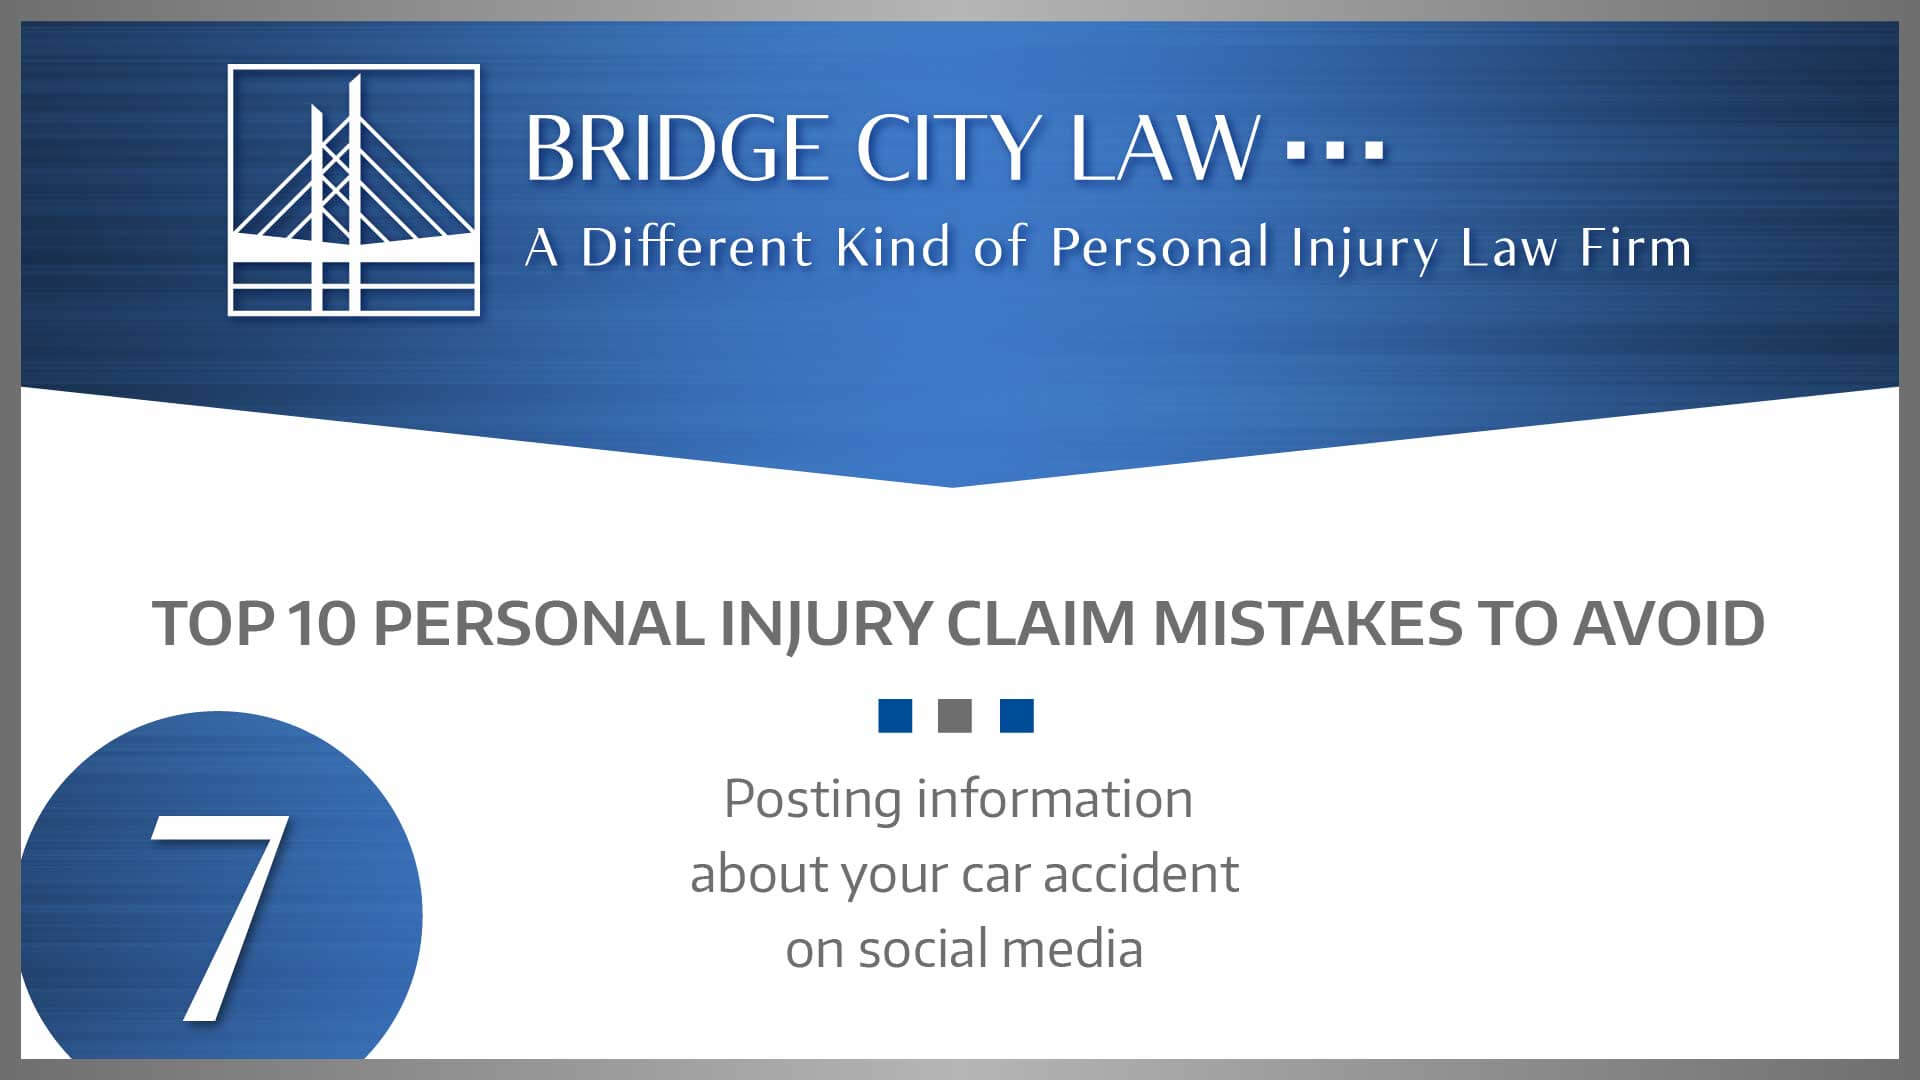 #7 MISTAKE: Posting information about your car accident on social media.